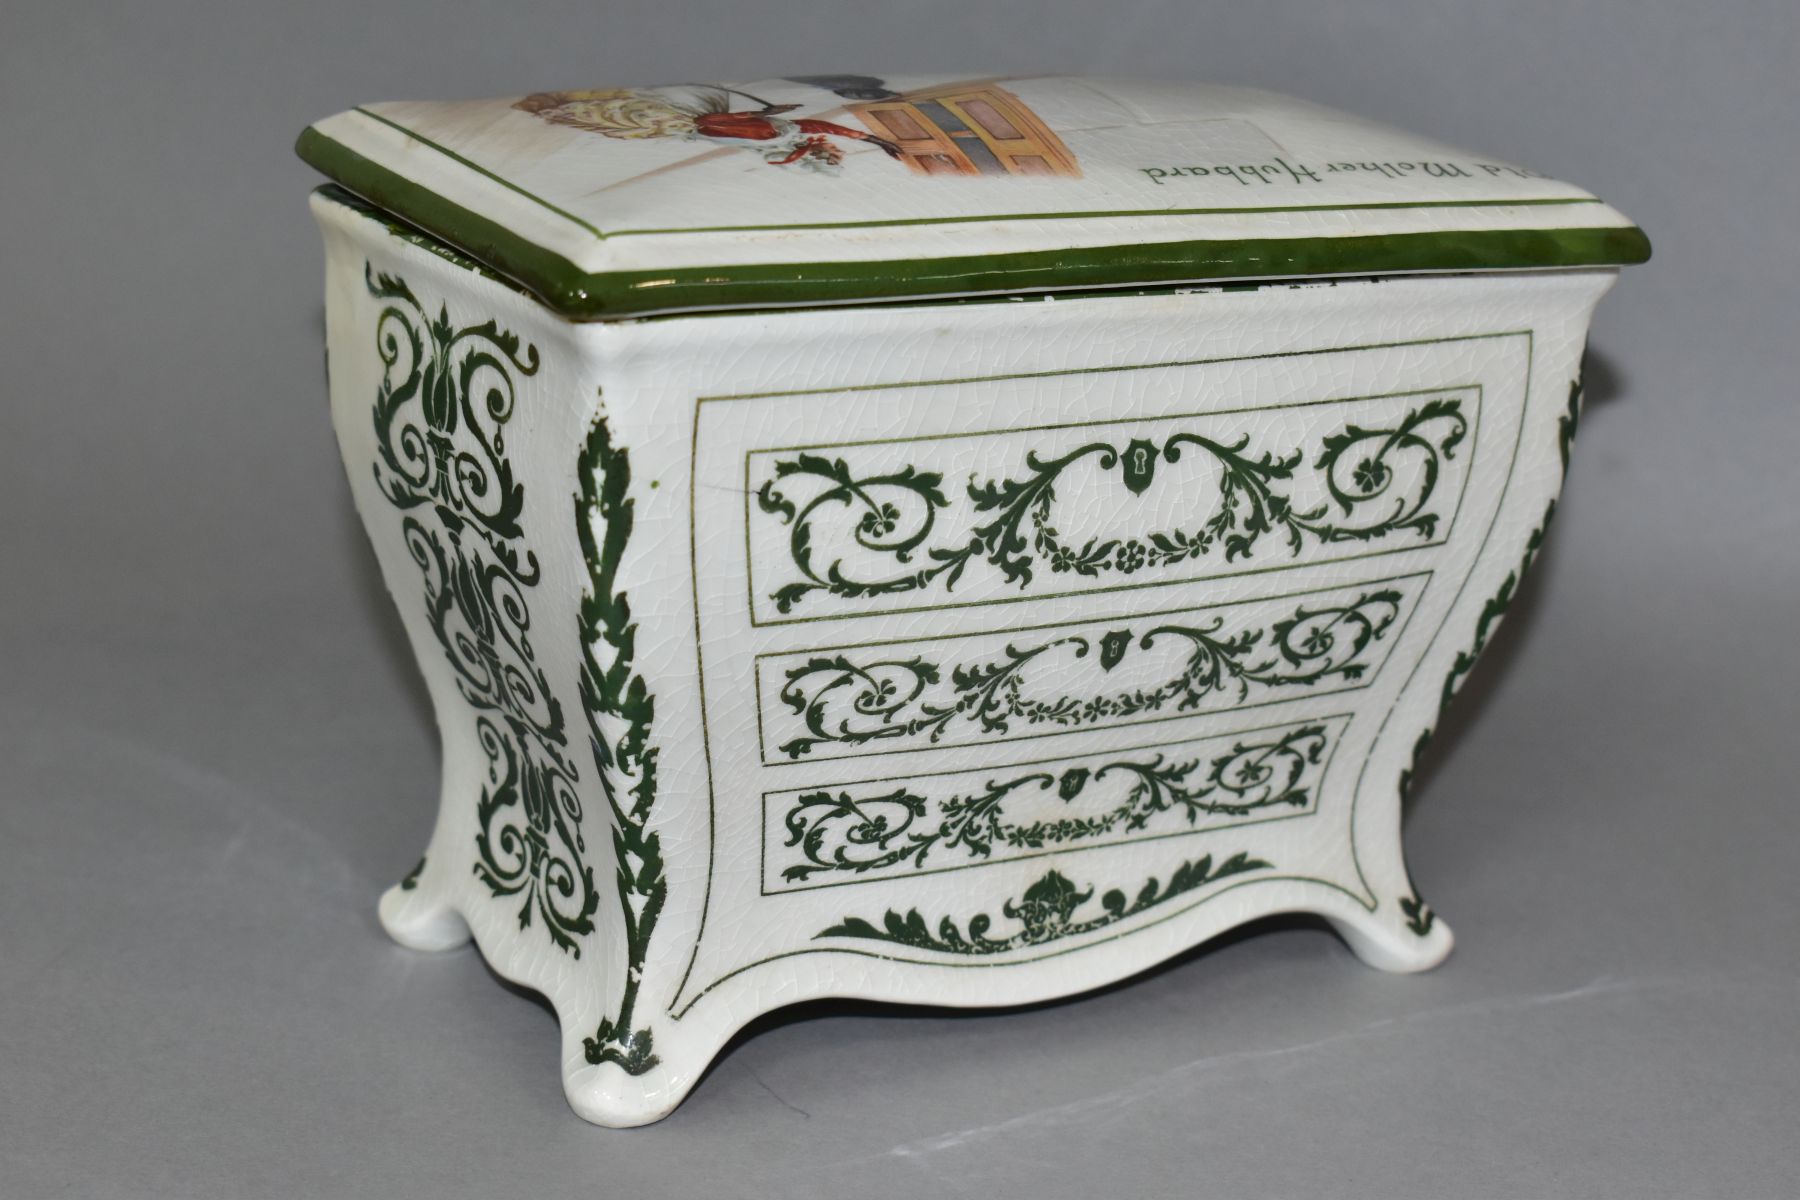 A ROYAL DOULTON NURSERY RHYMES 'A' SERIES WARE HUNTLEY & PALMERS BISCUIT CASKET IN THE FORM OF A - Image 4 of 7